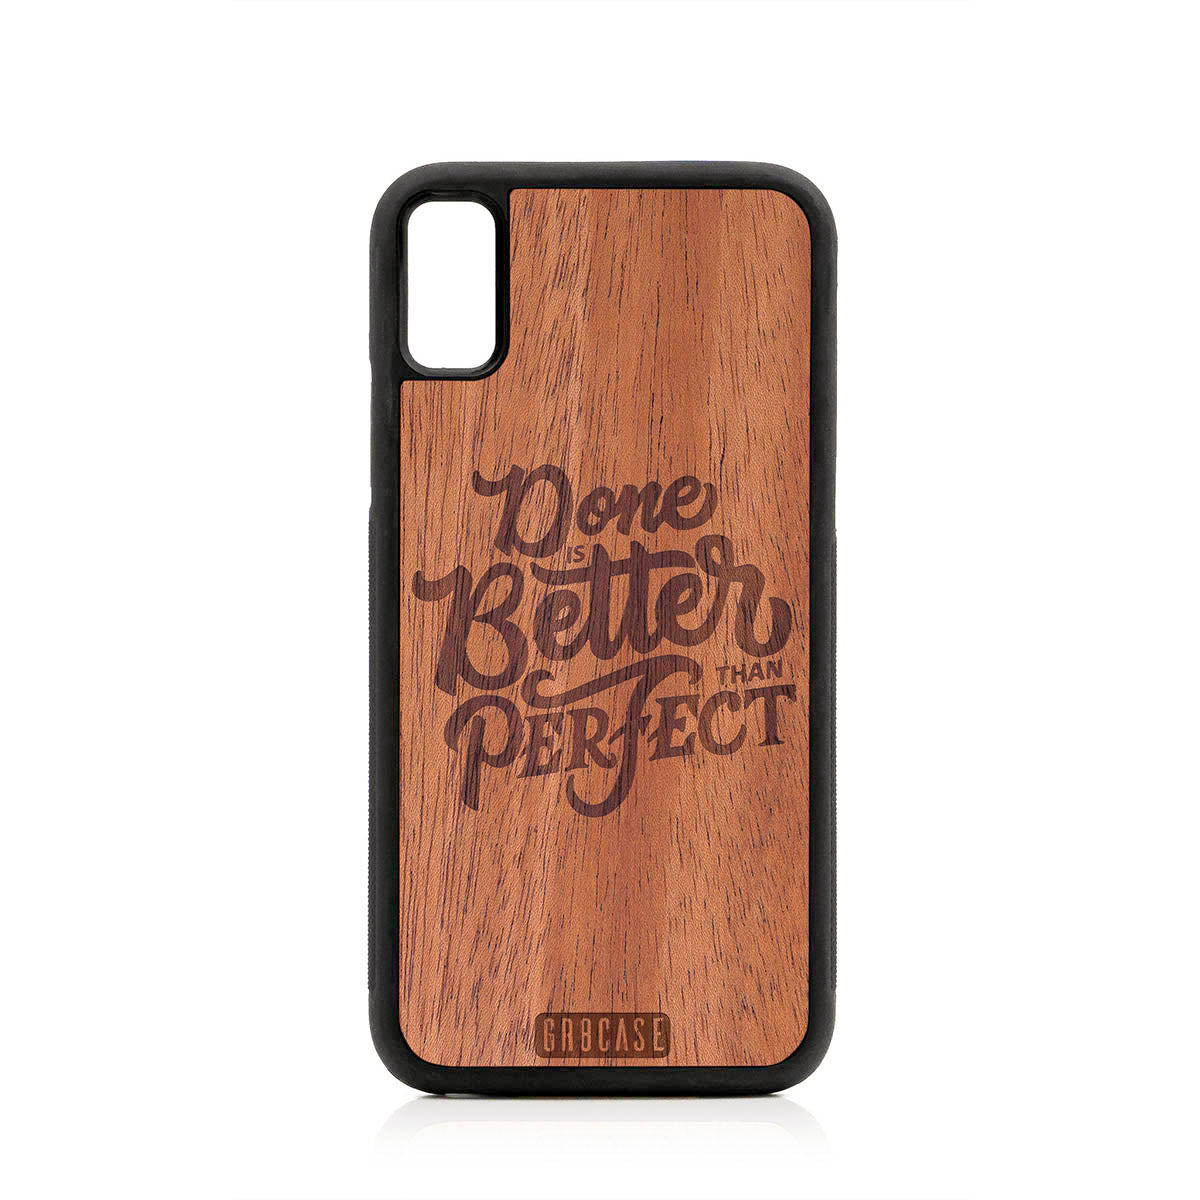 Done Is Better Than Perfect Design Wood Case For iPhone X/XS by GR8CASE